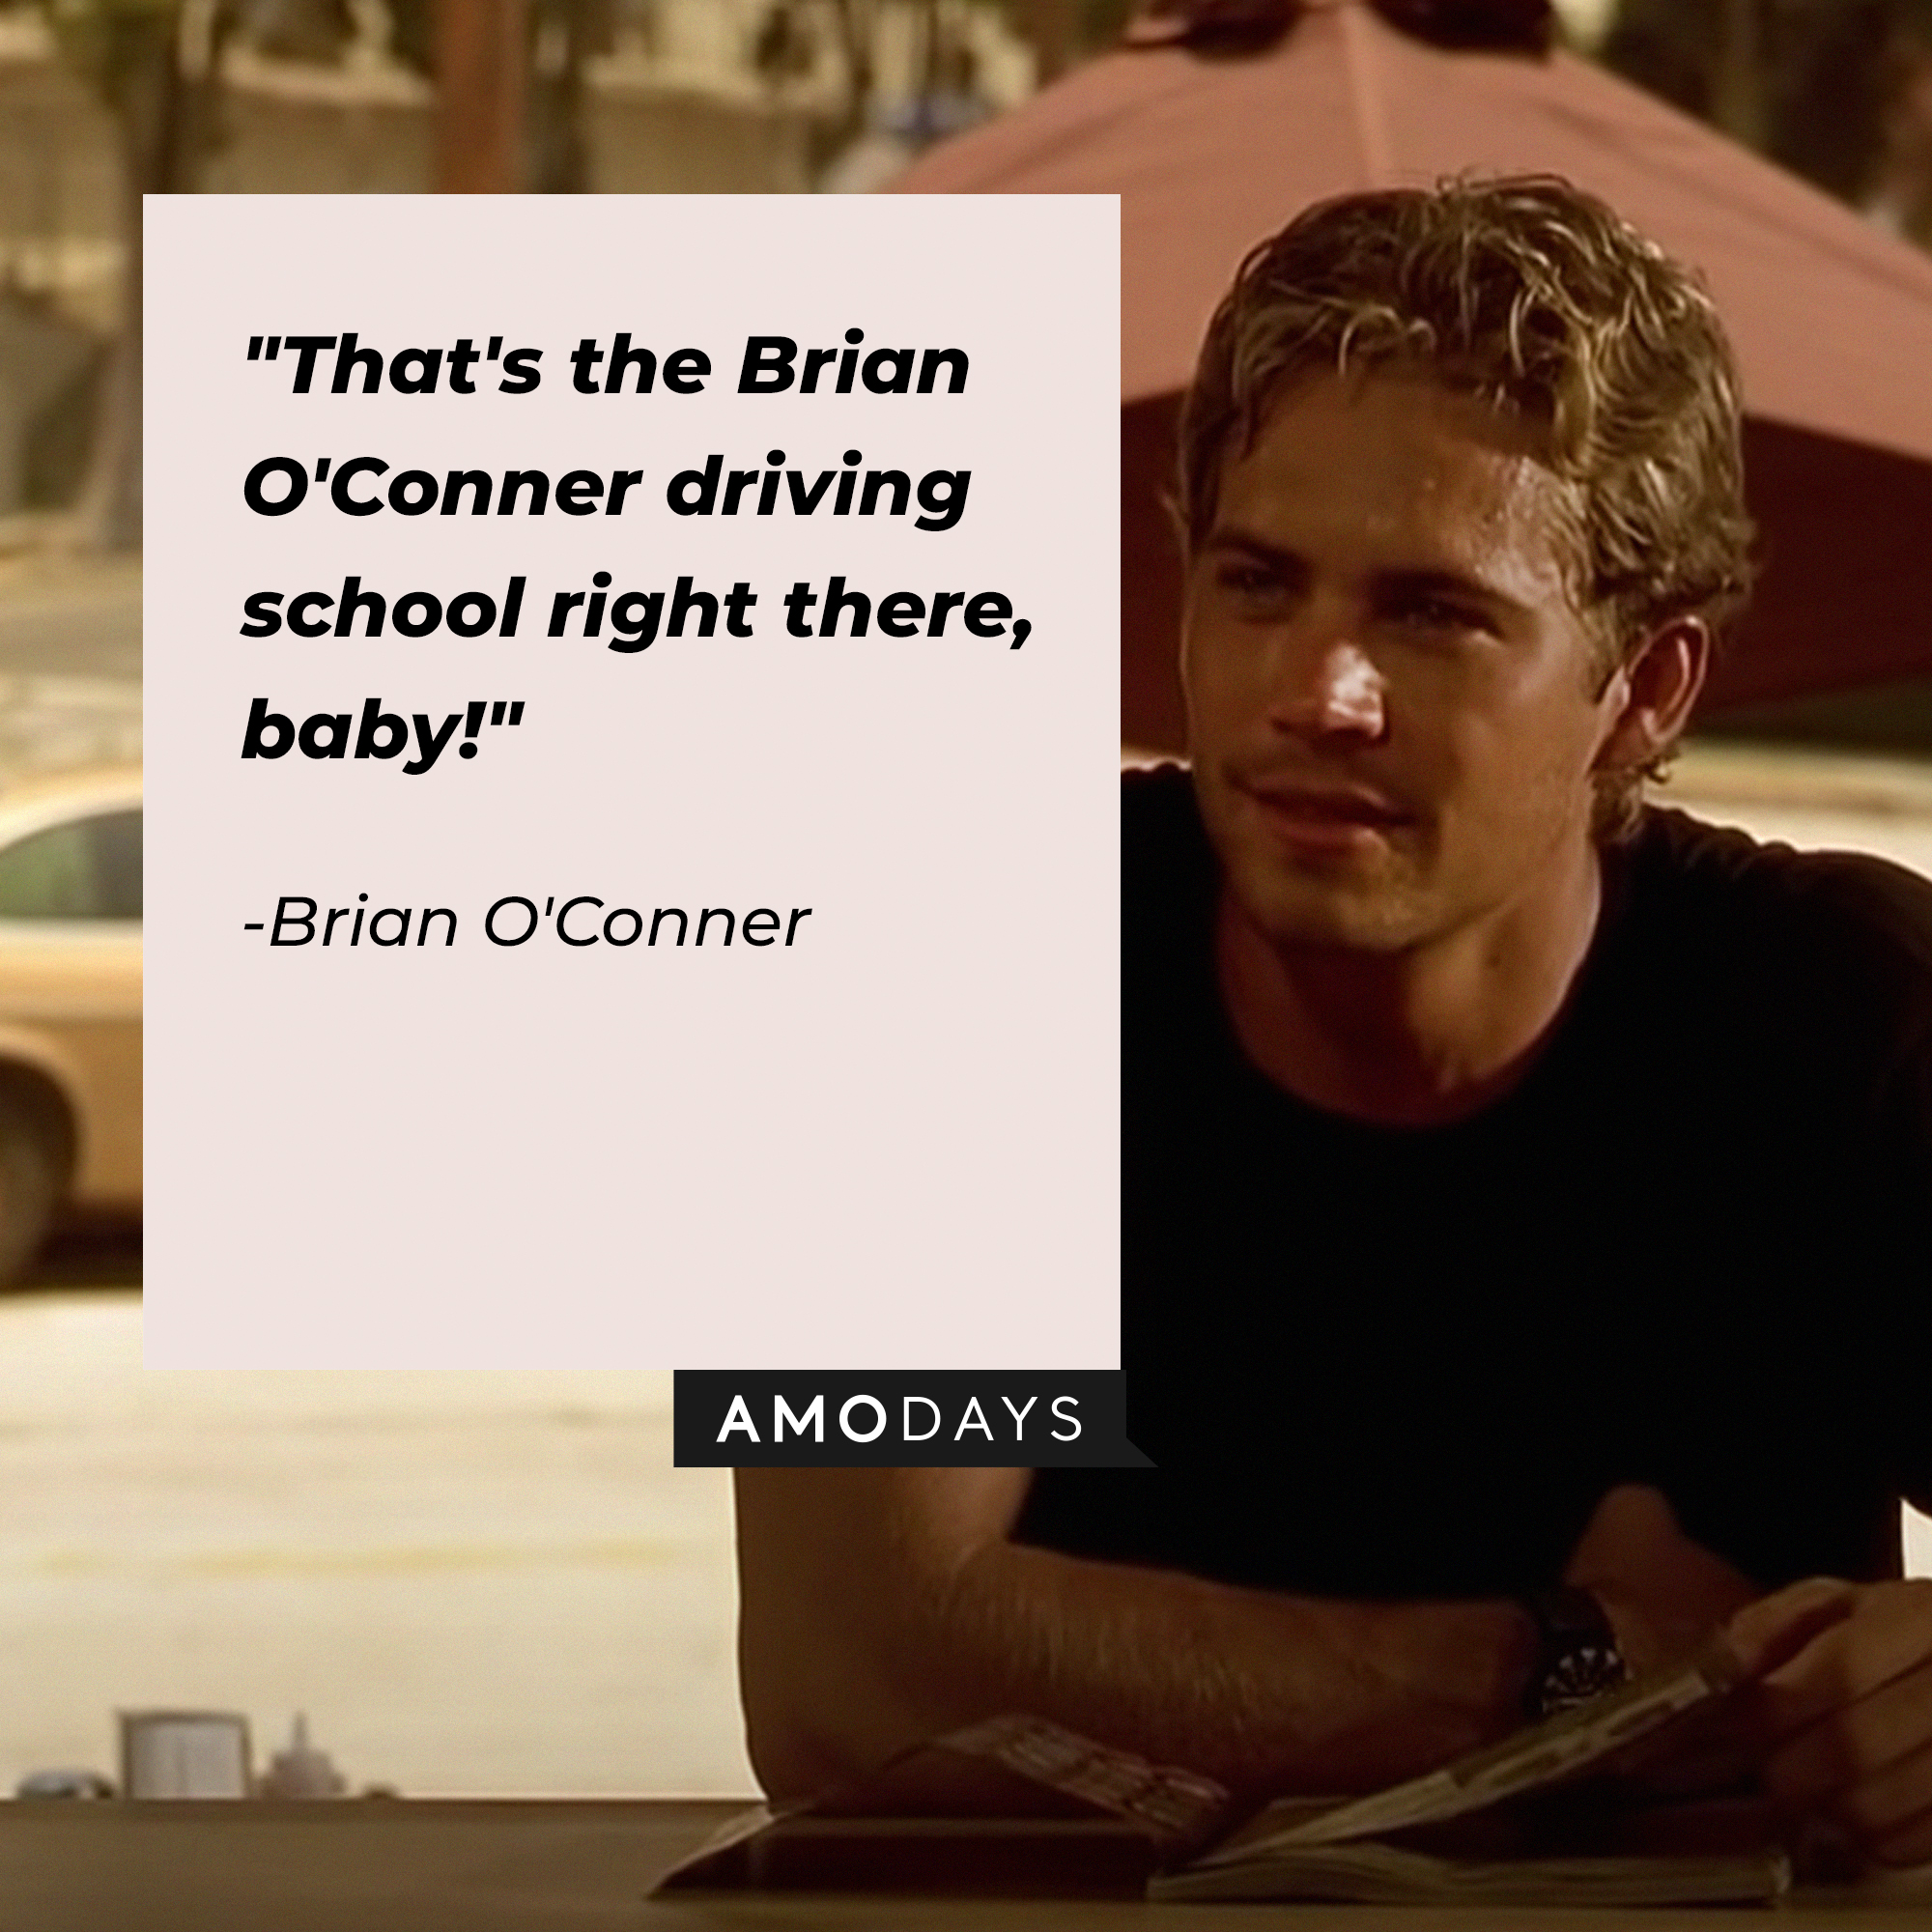 Brian O'Conner, with his quote: “That's the Brian O'Conner driving school right there, baby!” | Source: facebook.com/TheFastSaga